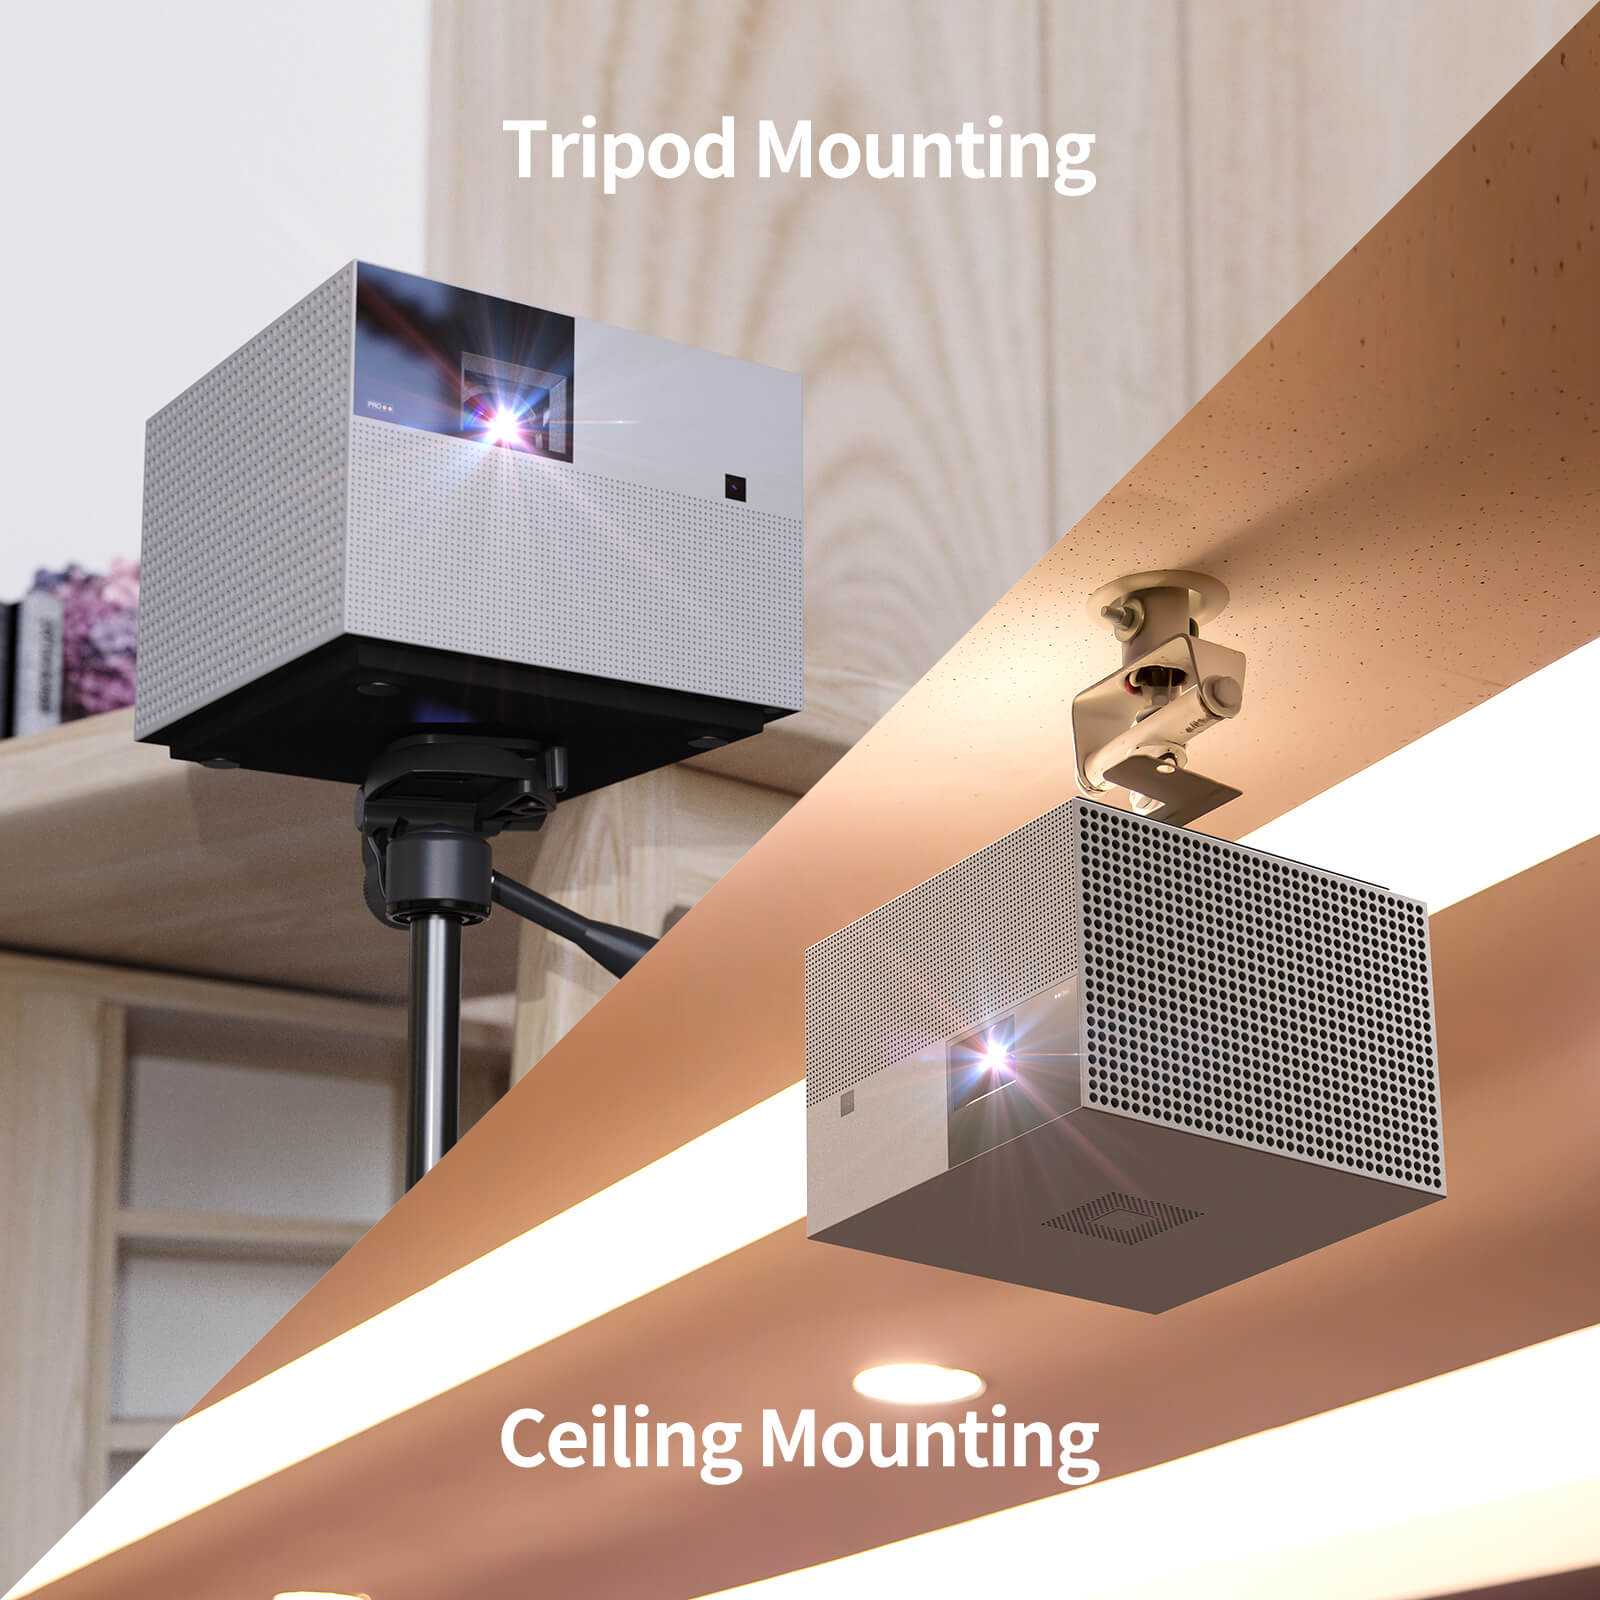 How to Mount A Ceiling Projector